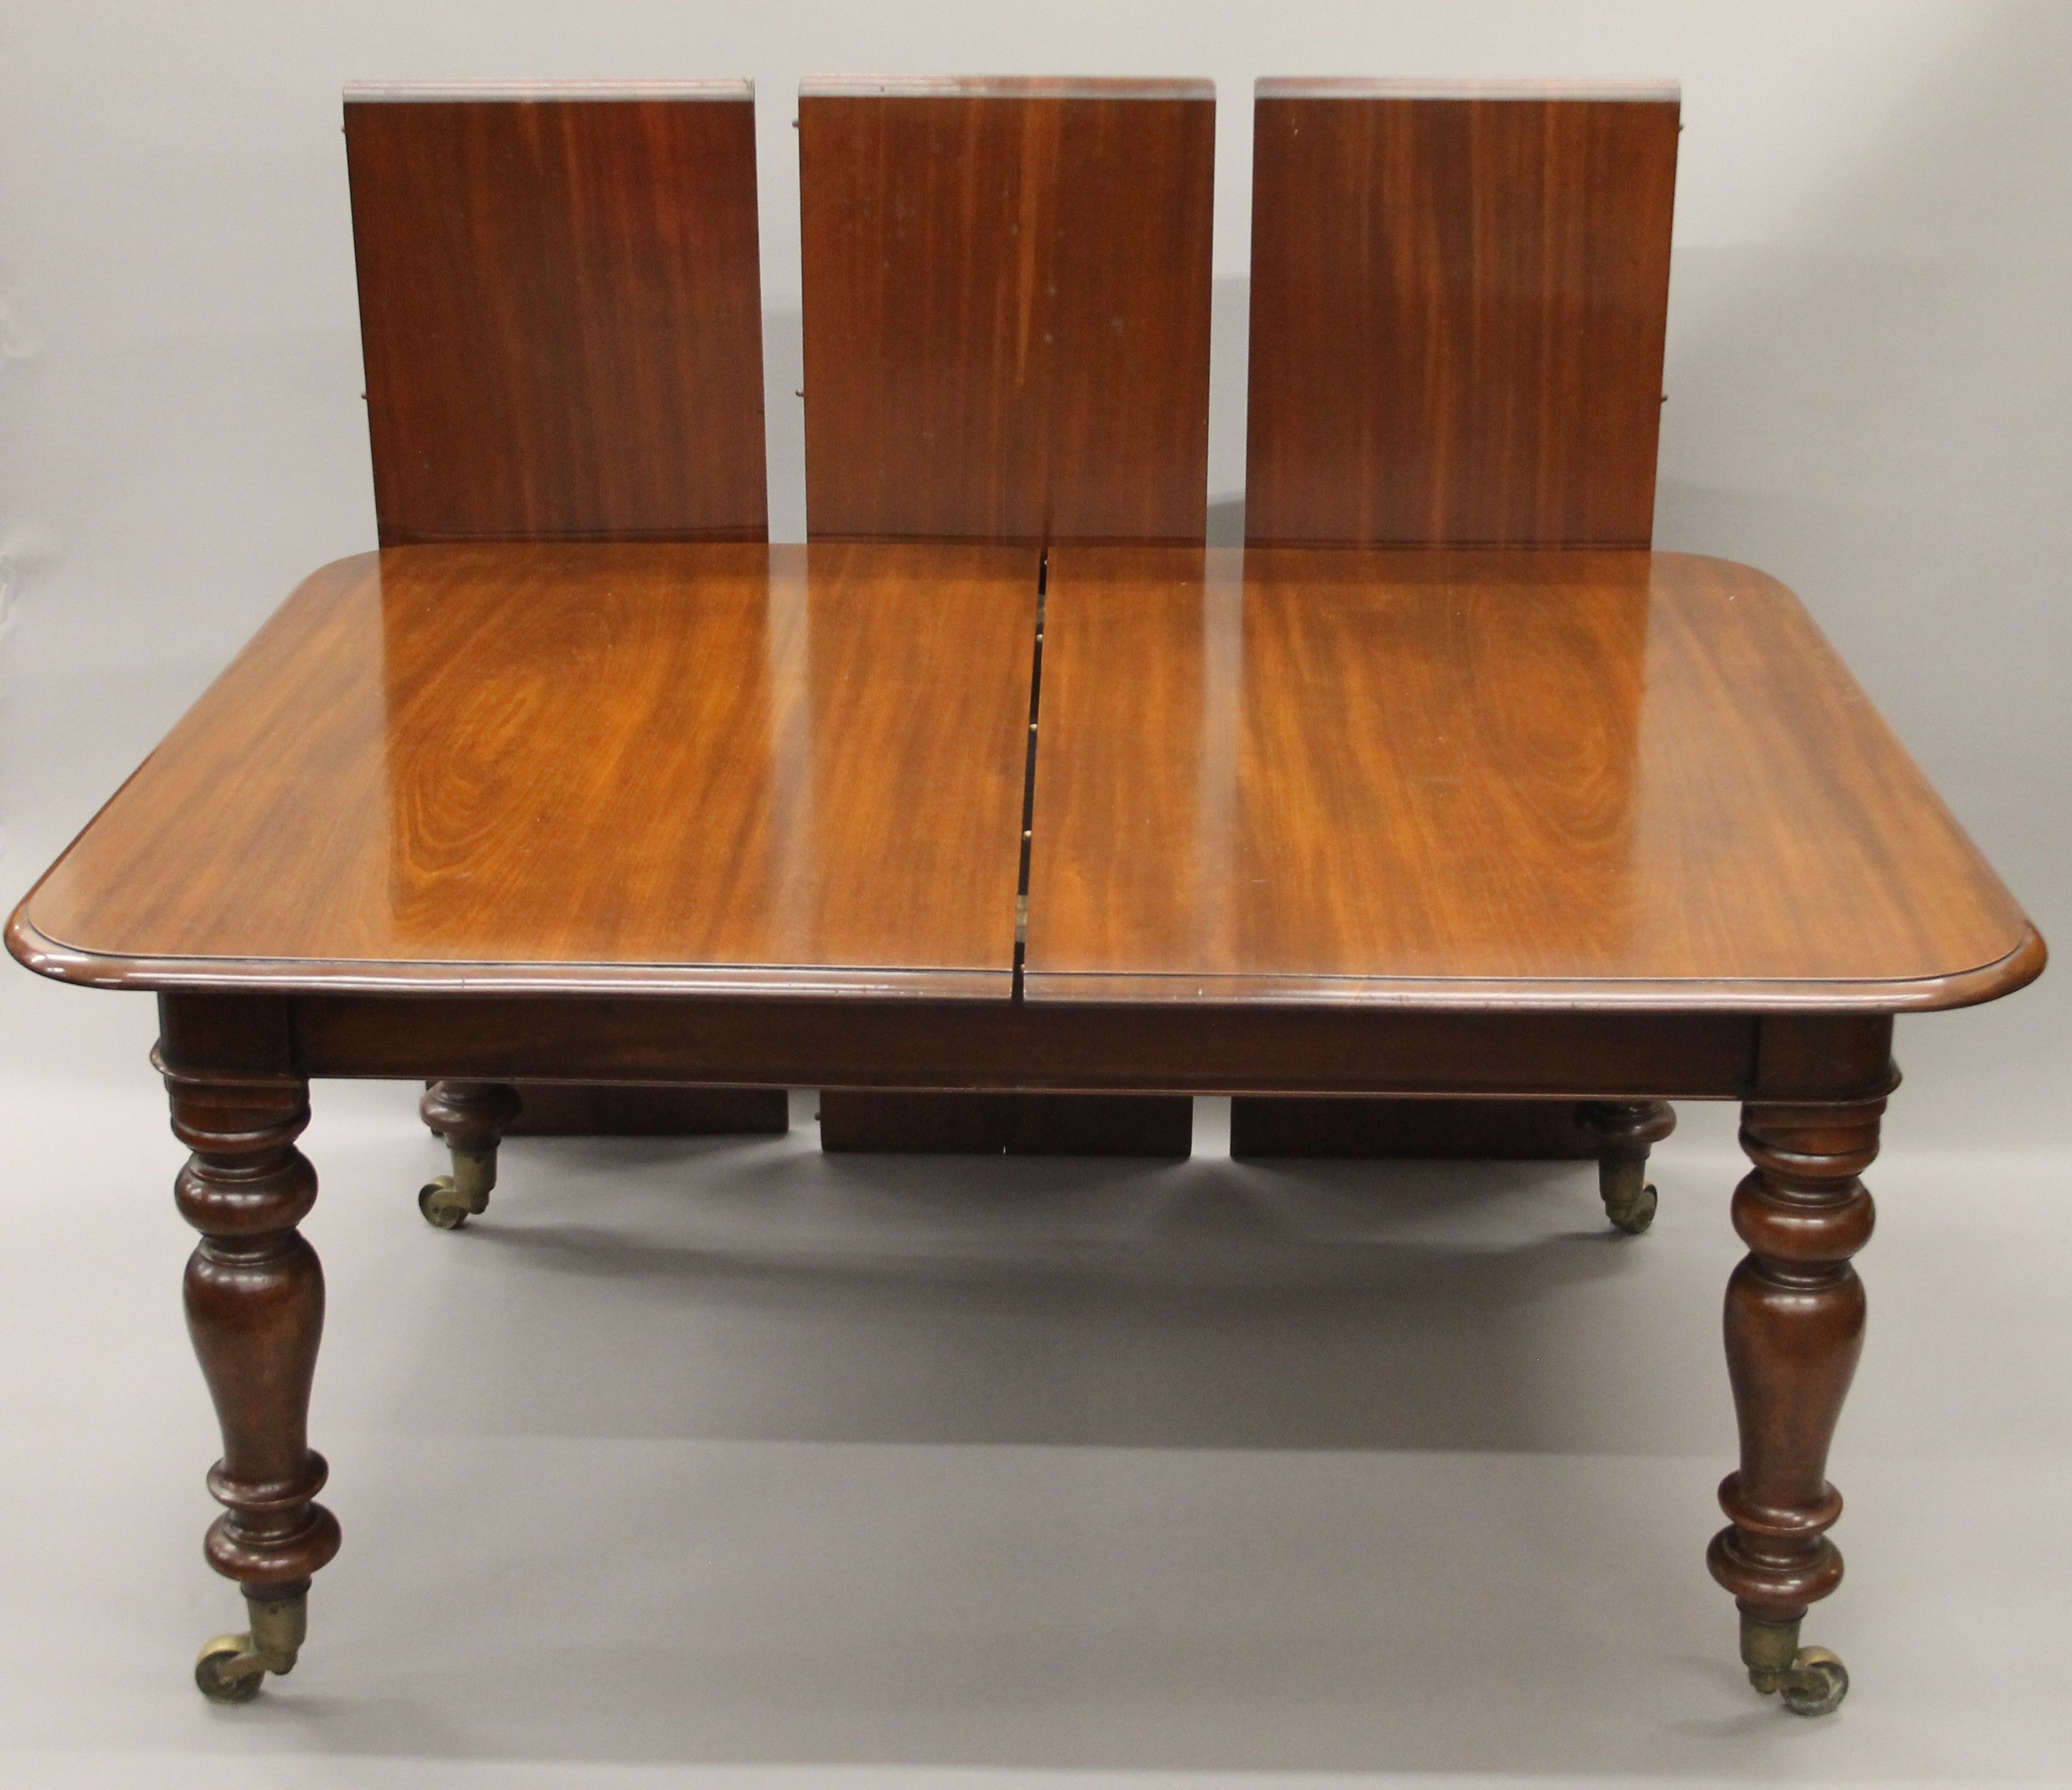 A 19th century mahogany three-leaf extending dining table.